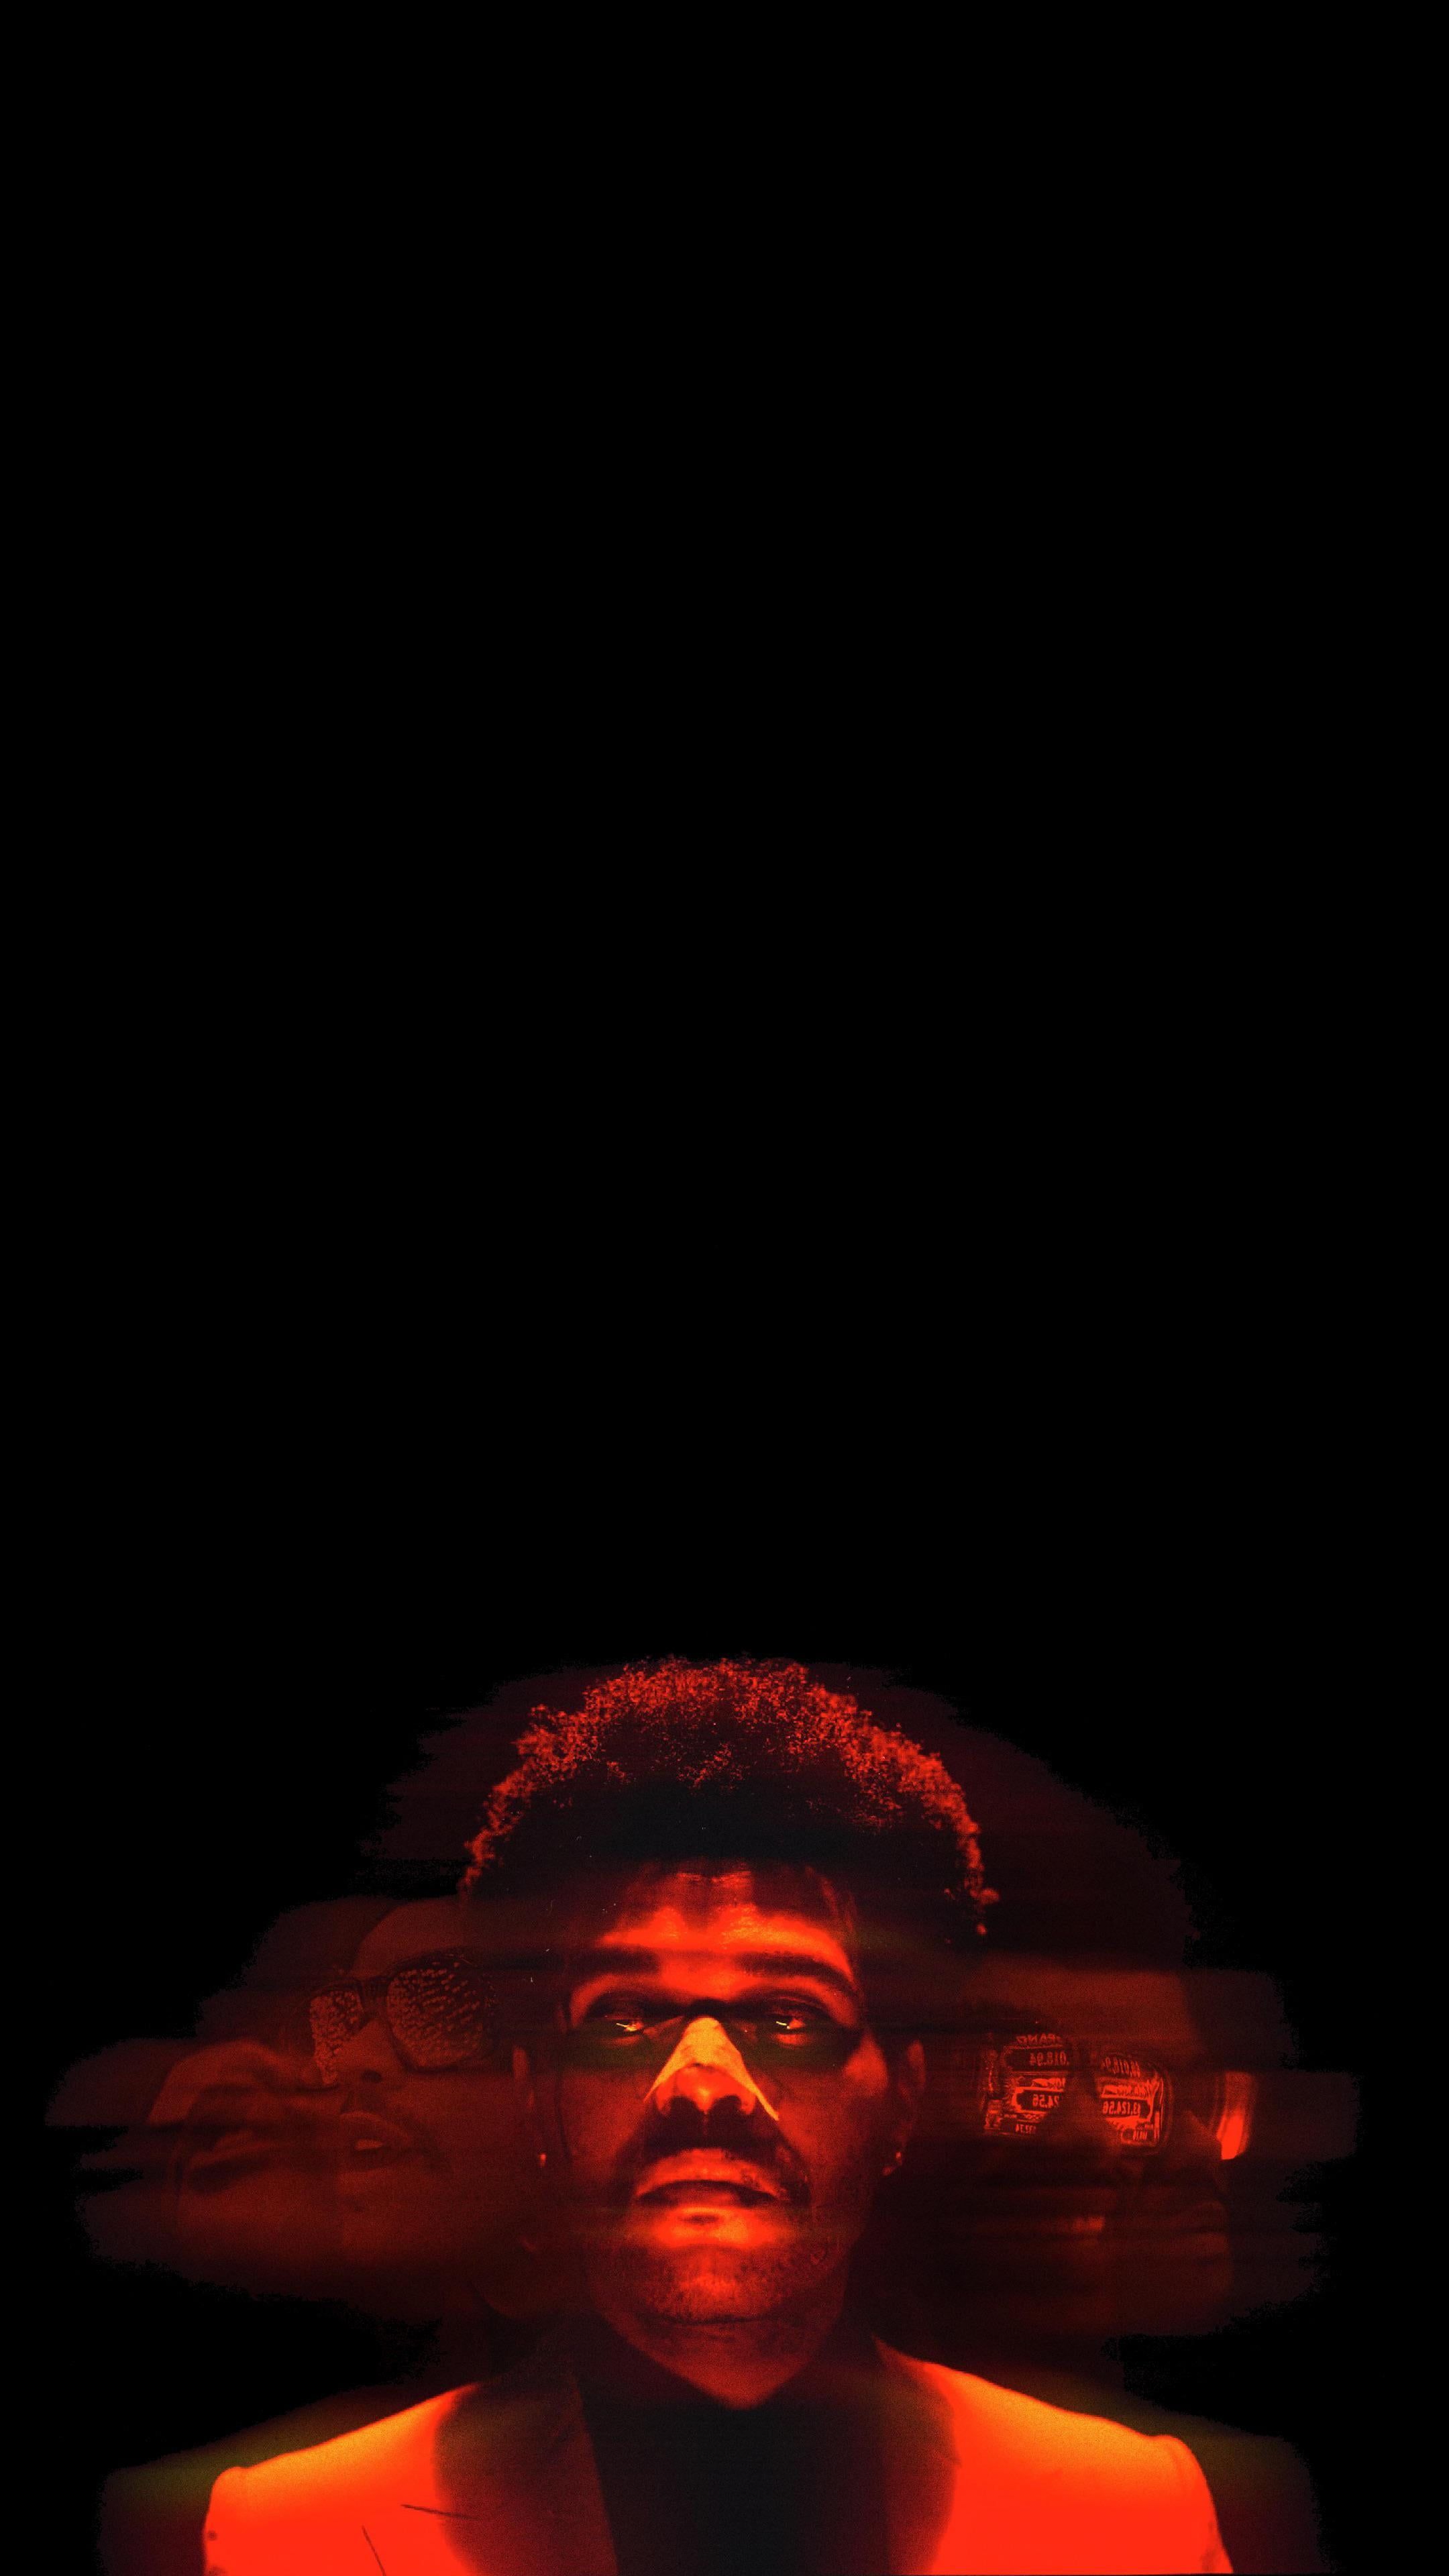 amoled The Weeknd #vertical #iPhone K #wallpaper #hdwallpaper #desktop. The weeknd wallpaper iphone, The weeknd background, The weeknd poster